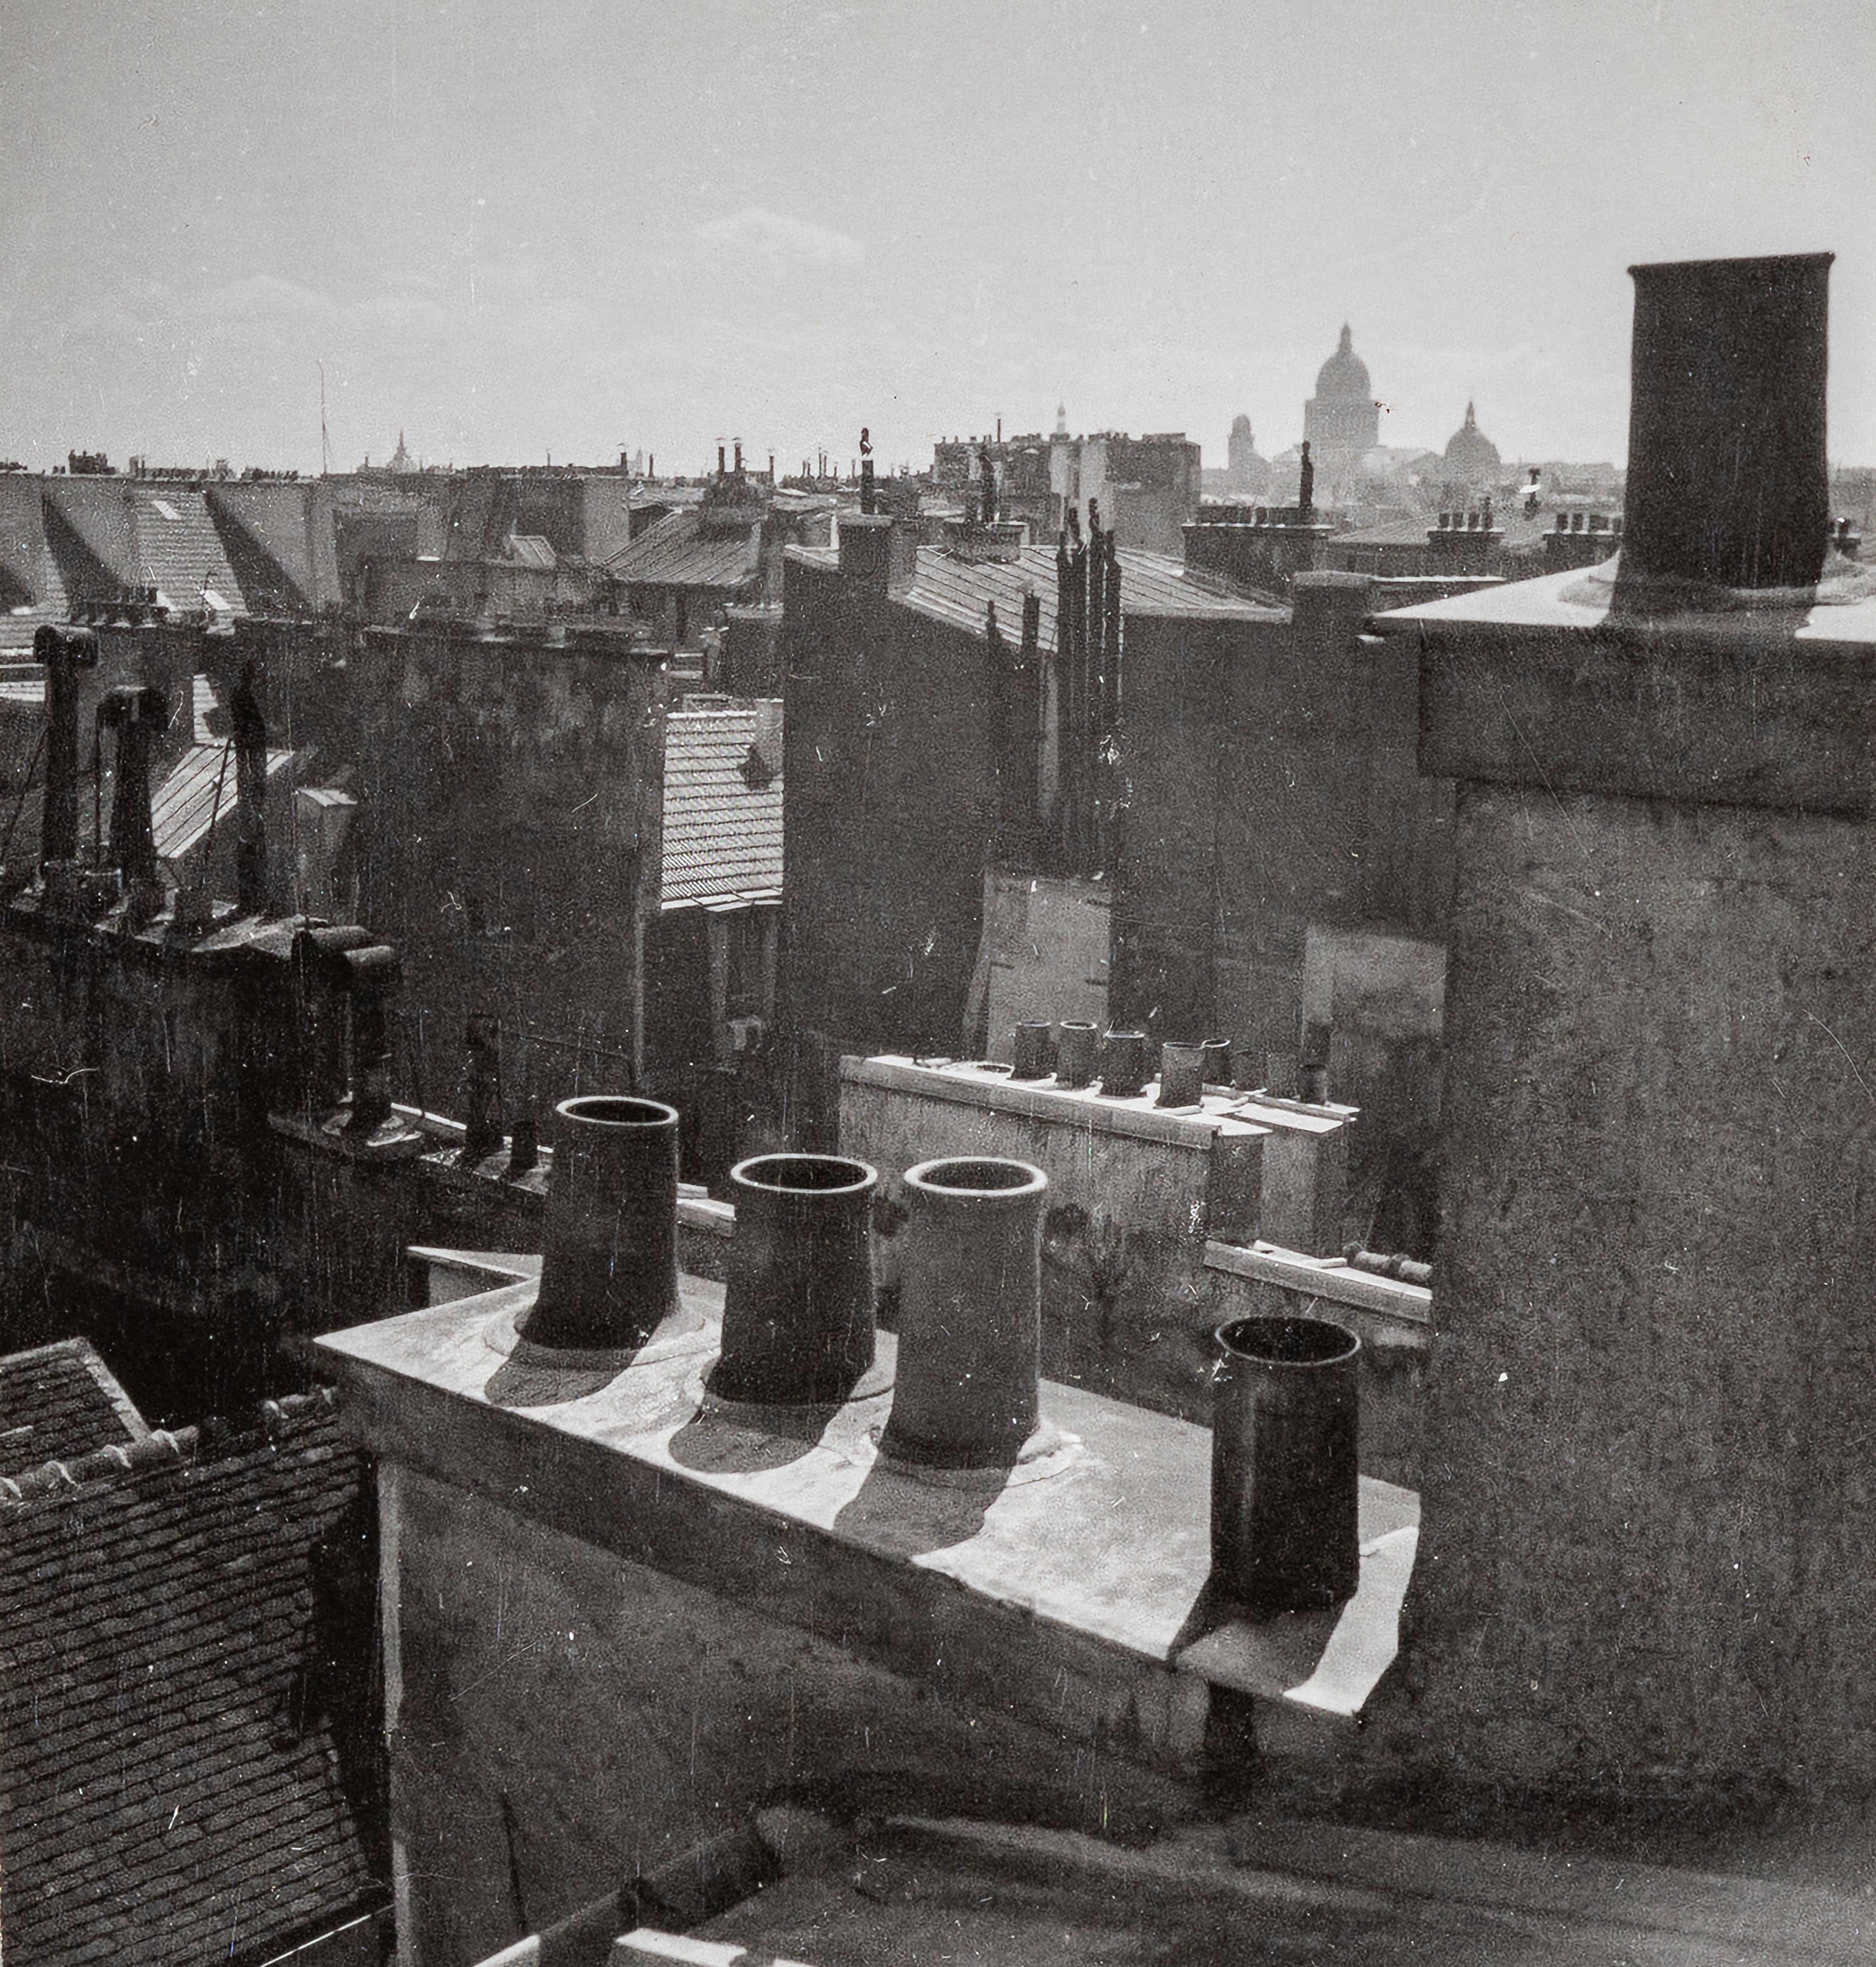 Dora Maar Black and White Photograph - Rooves [The Pantheon in the Distance], Paris